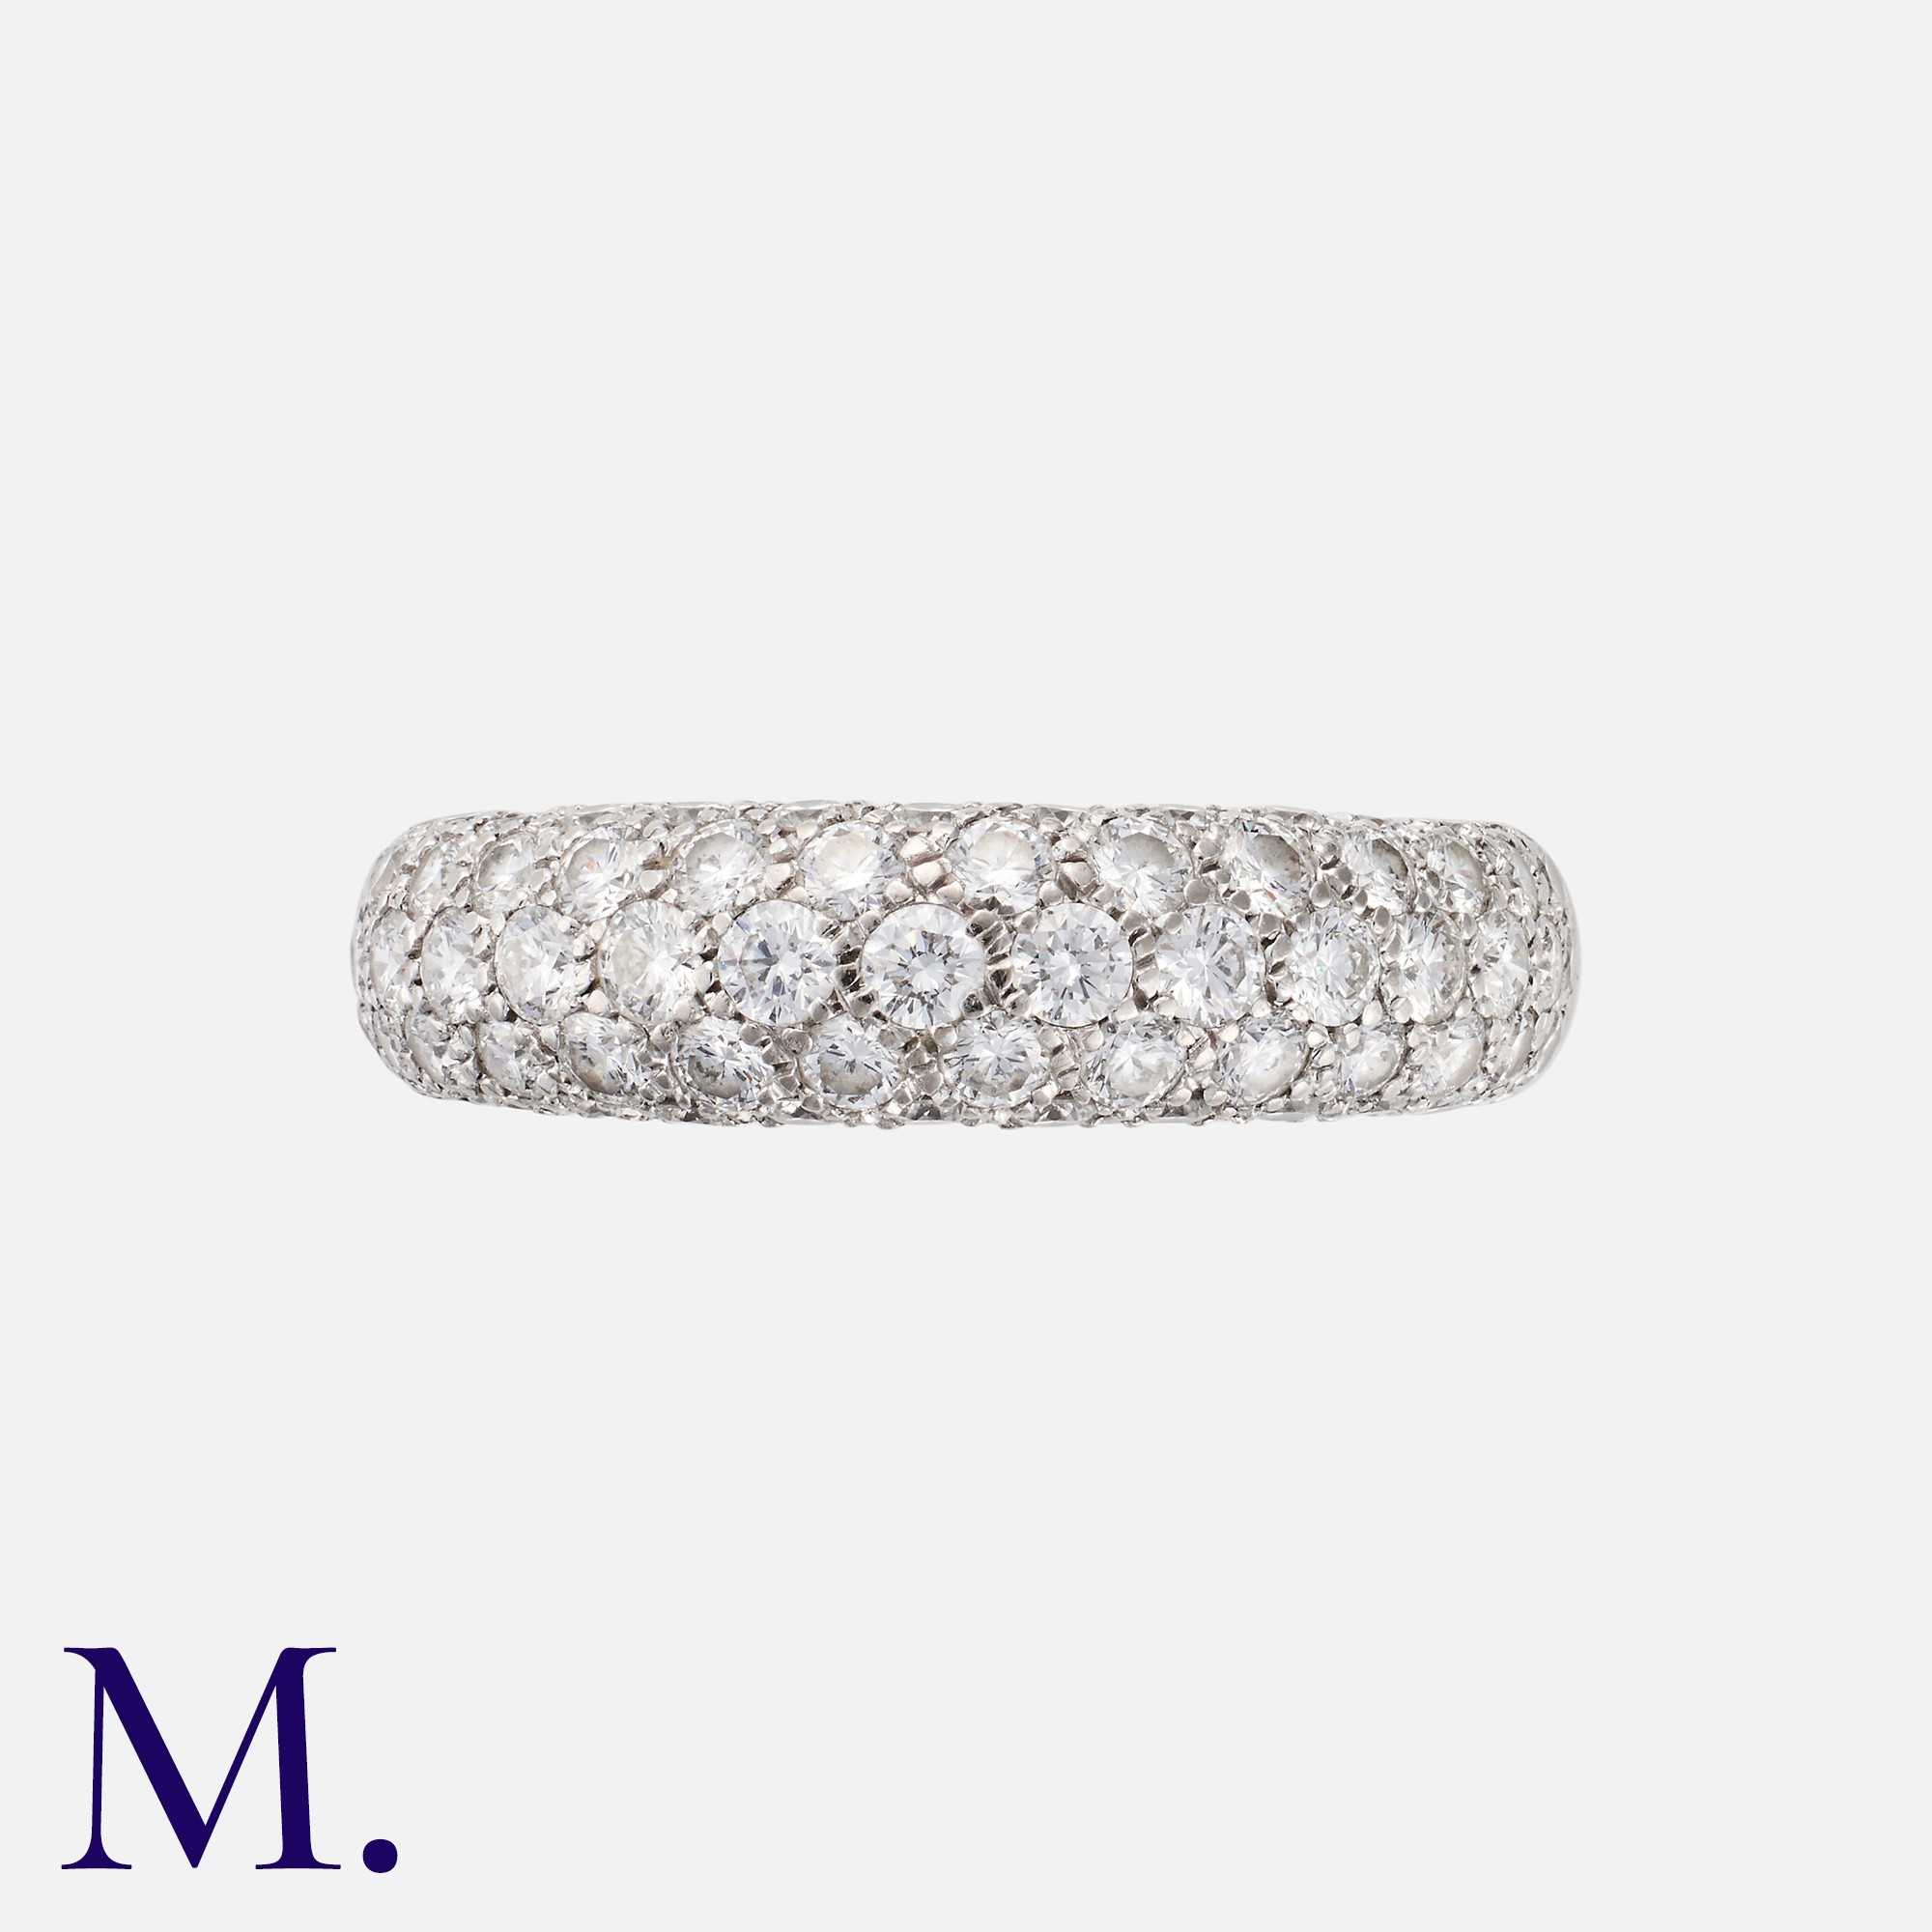 CARTIER. A Diamond Ring in 18K white gold, set with 68 round cut diamonds, In original box and outer